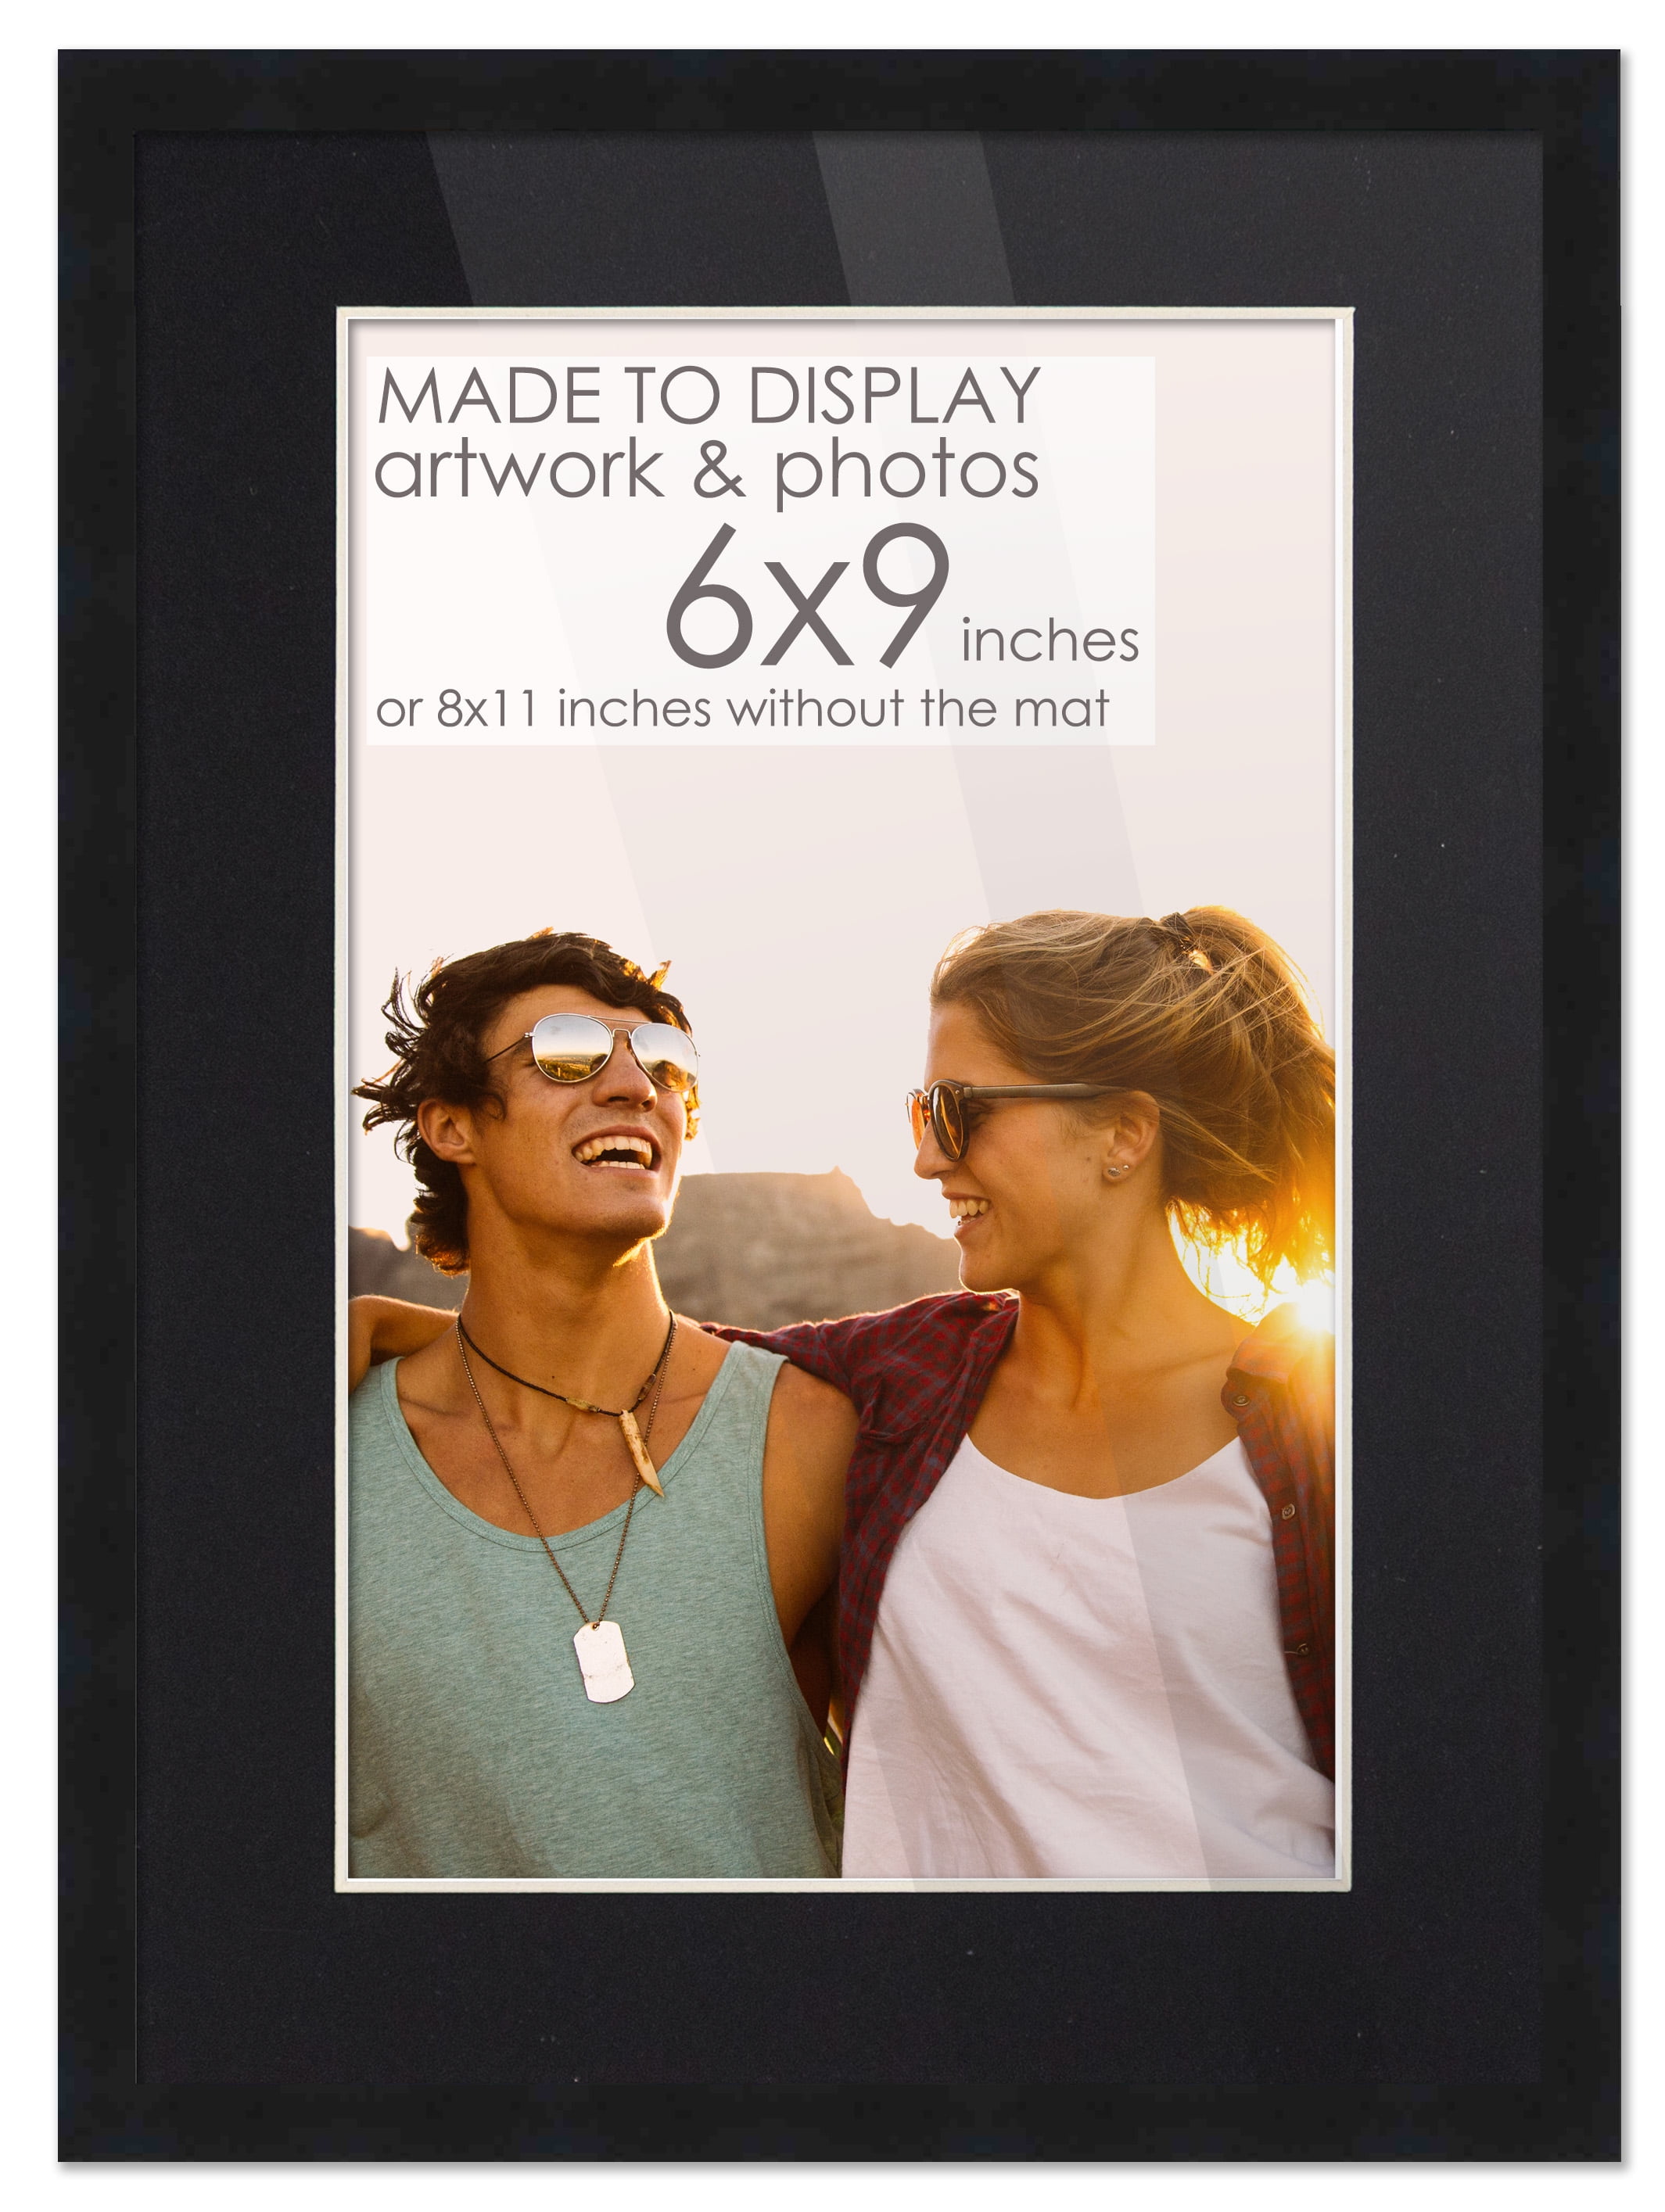 16x20 Picture Frames for Black Picture Frame 16x20 Matted to 11x14 or 16x20  Without Mat, Wall Hanging Photo Frame, 8 Pack. 